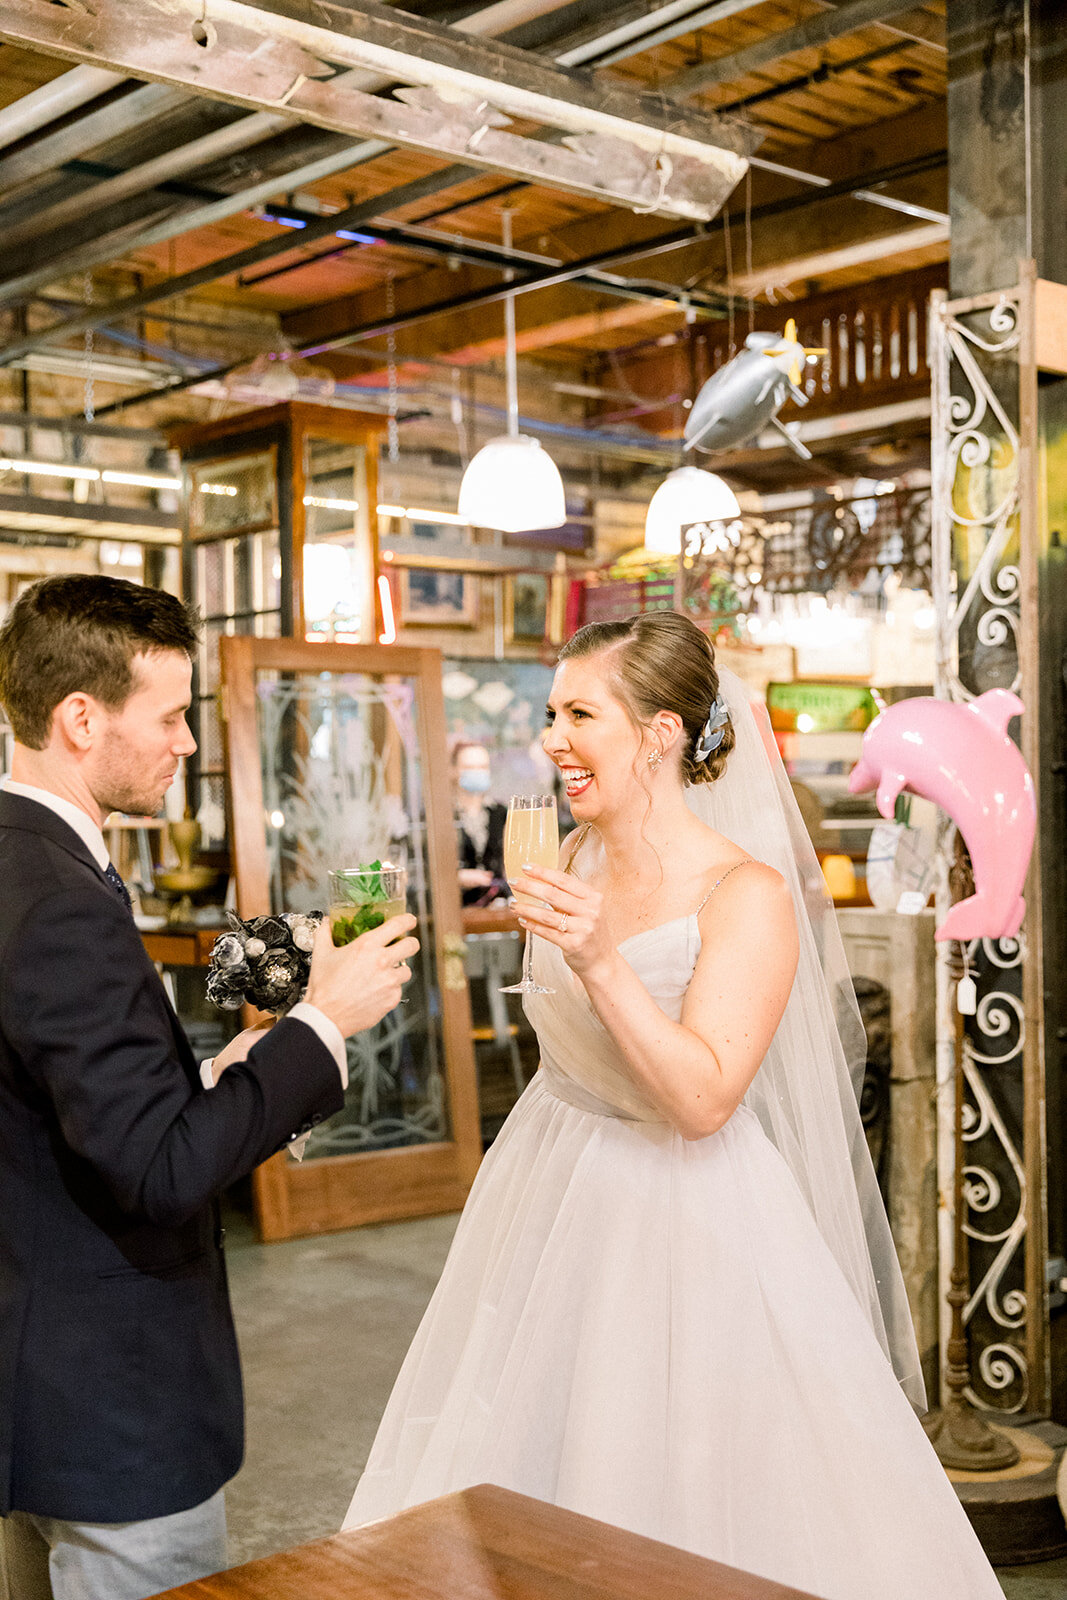 Celestial Vintage Wedding at Salvage One featured on CHI thee WED